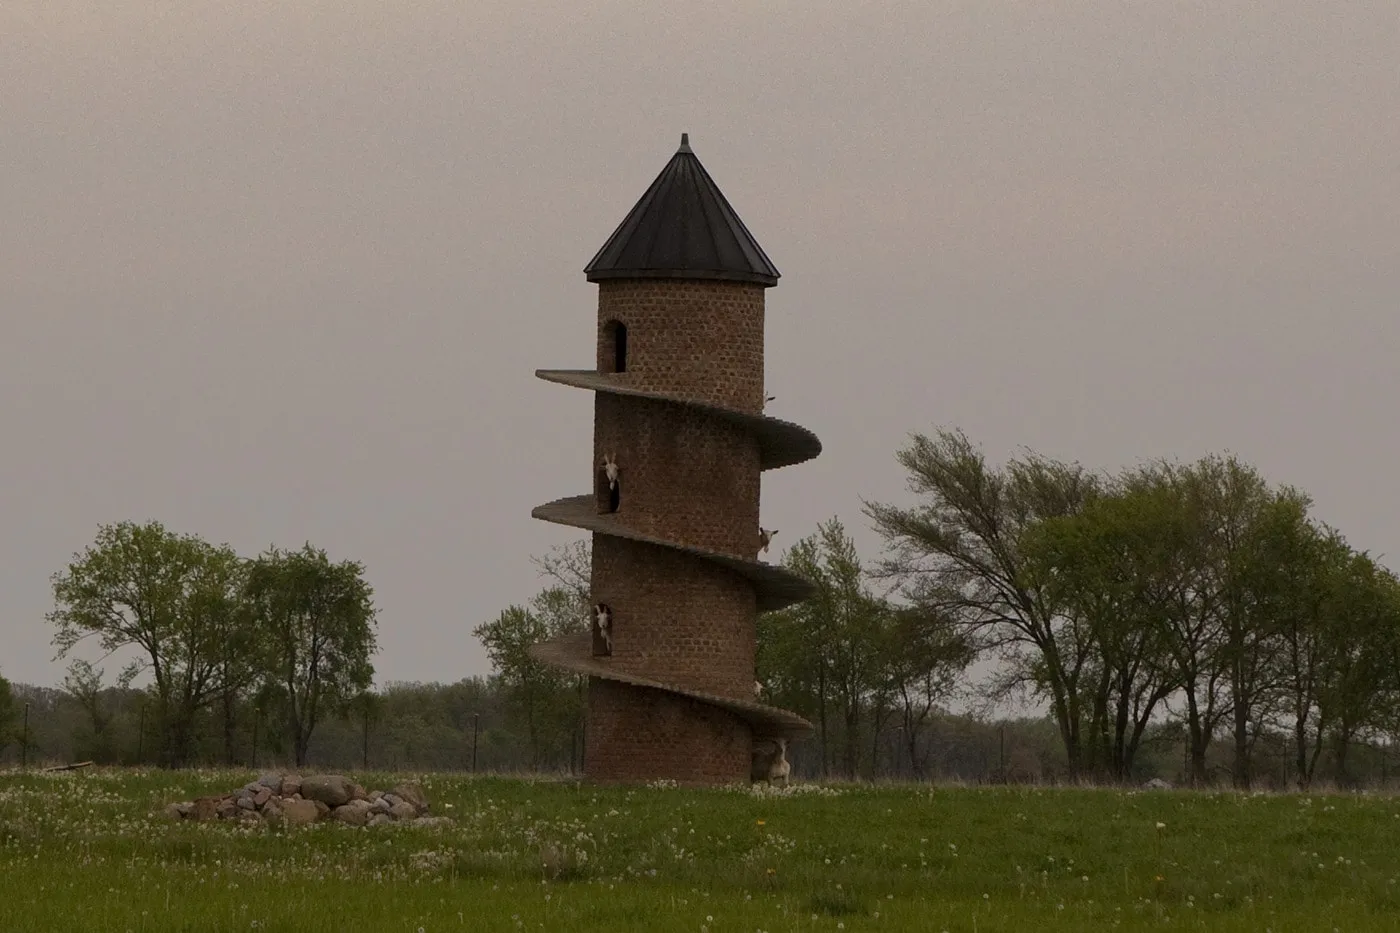 Findlay Illinois Goat Tower, or the goat tower of baaa, in Findlay, Illinois